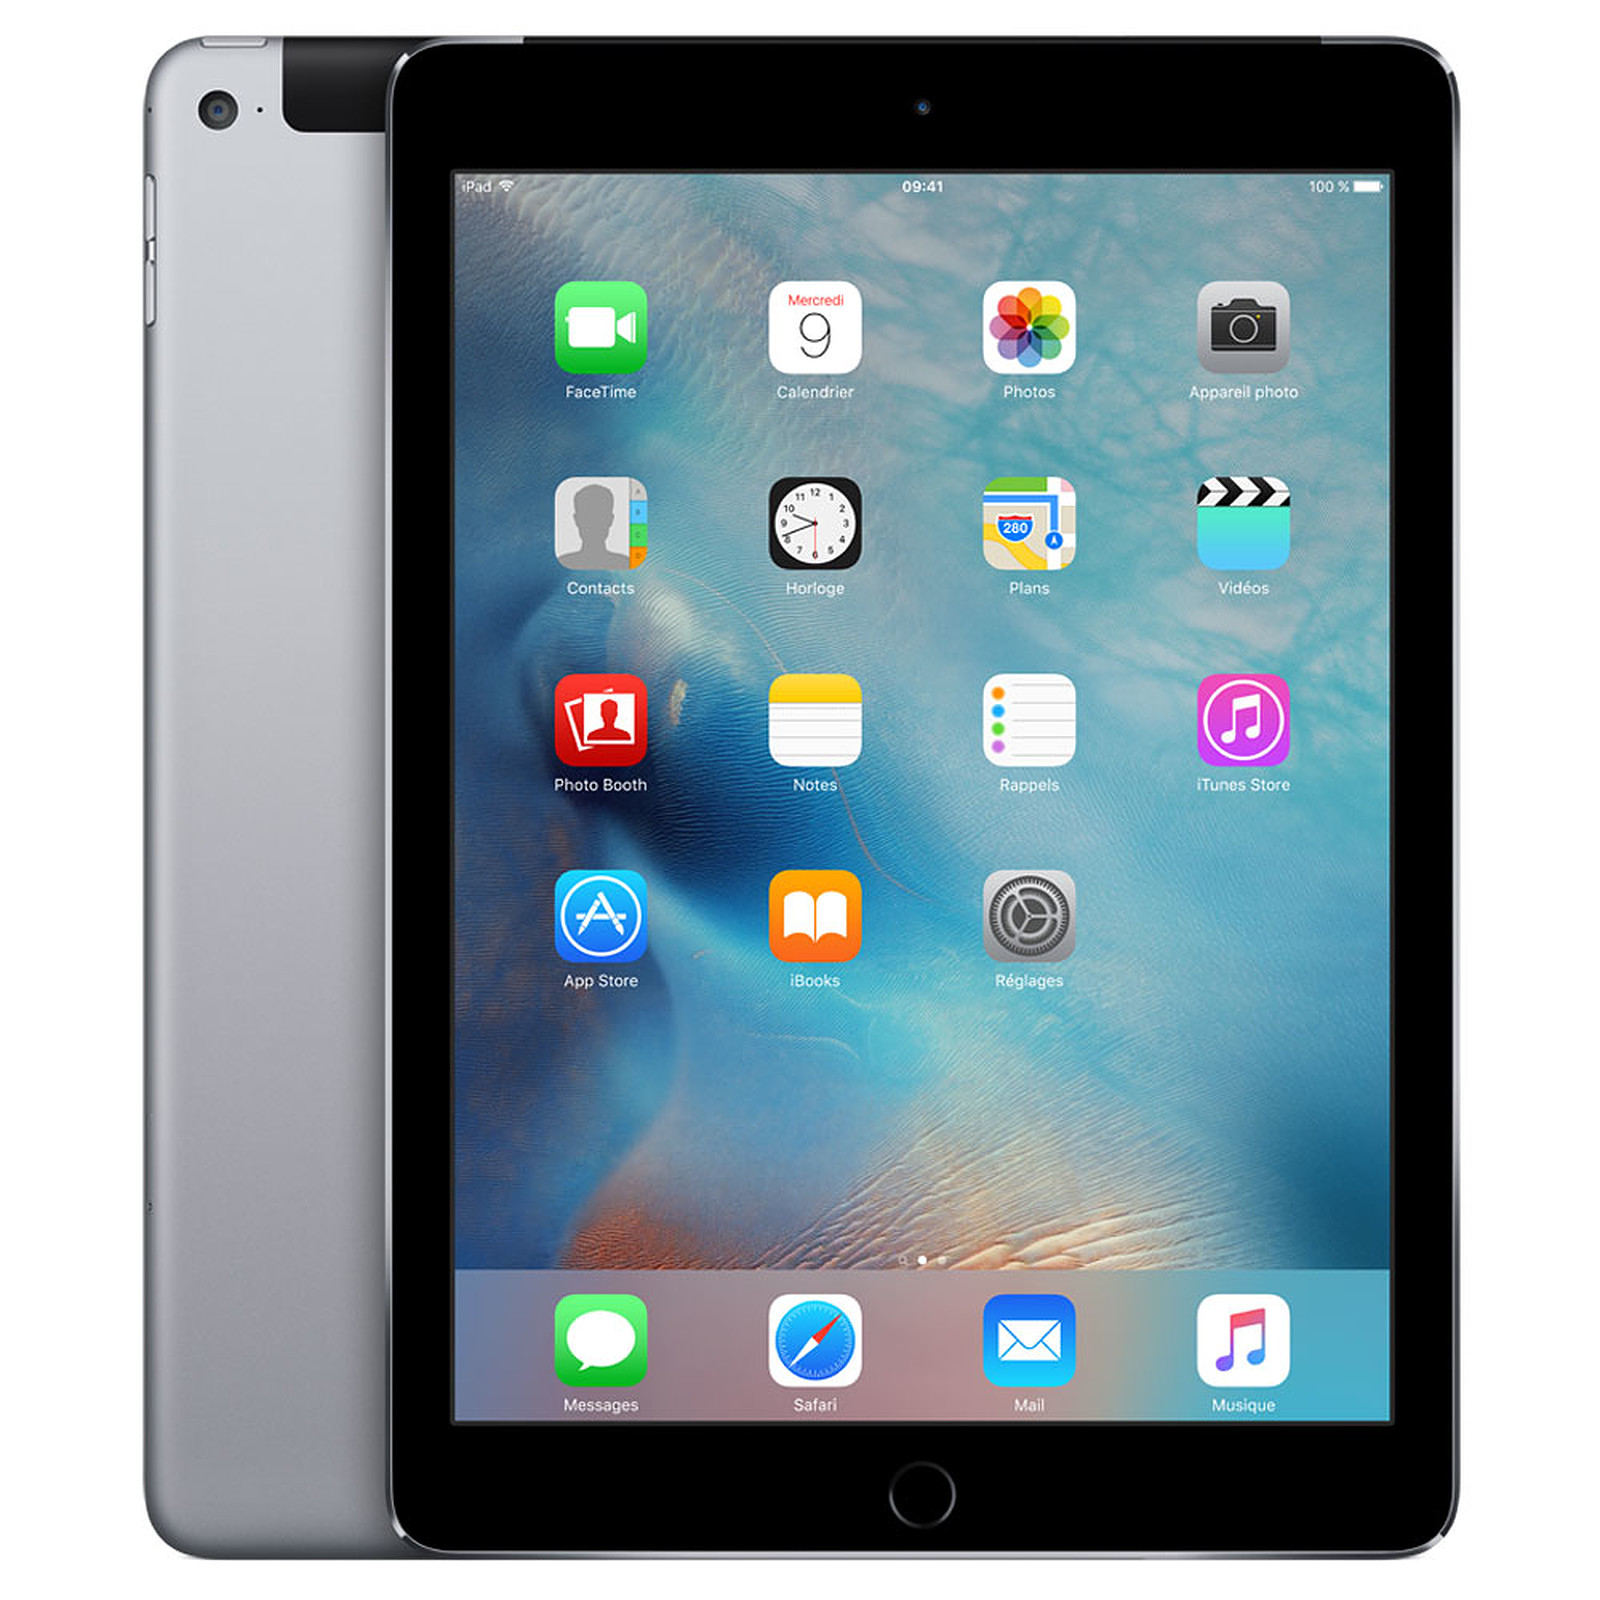 Apple iPad Air 2 32 Go Wi-Fi + Cellular Gris sideral · Reconditionne - Tablette tactile Apple